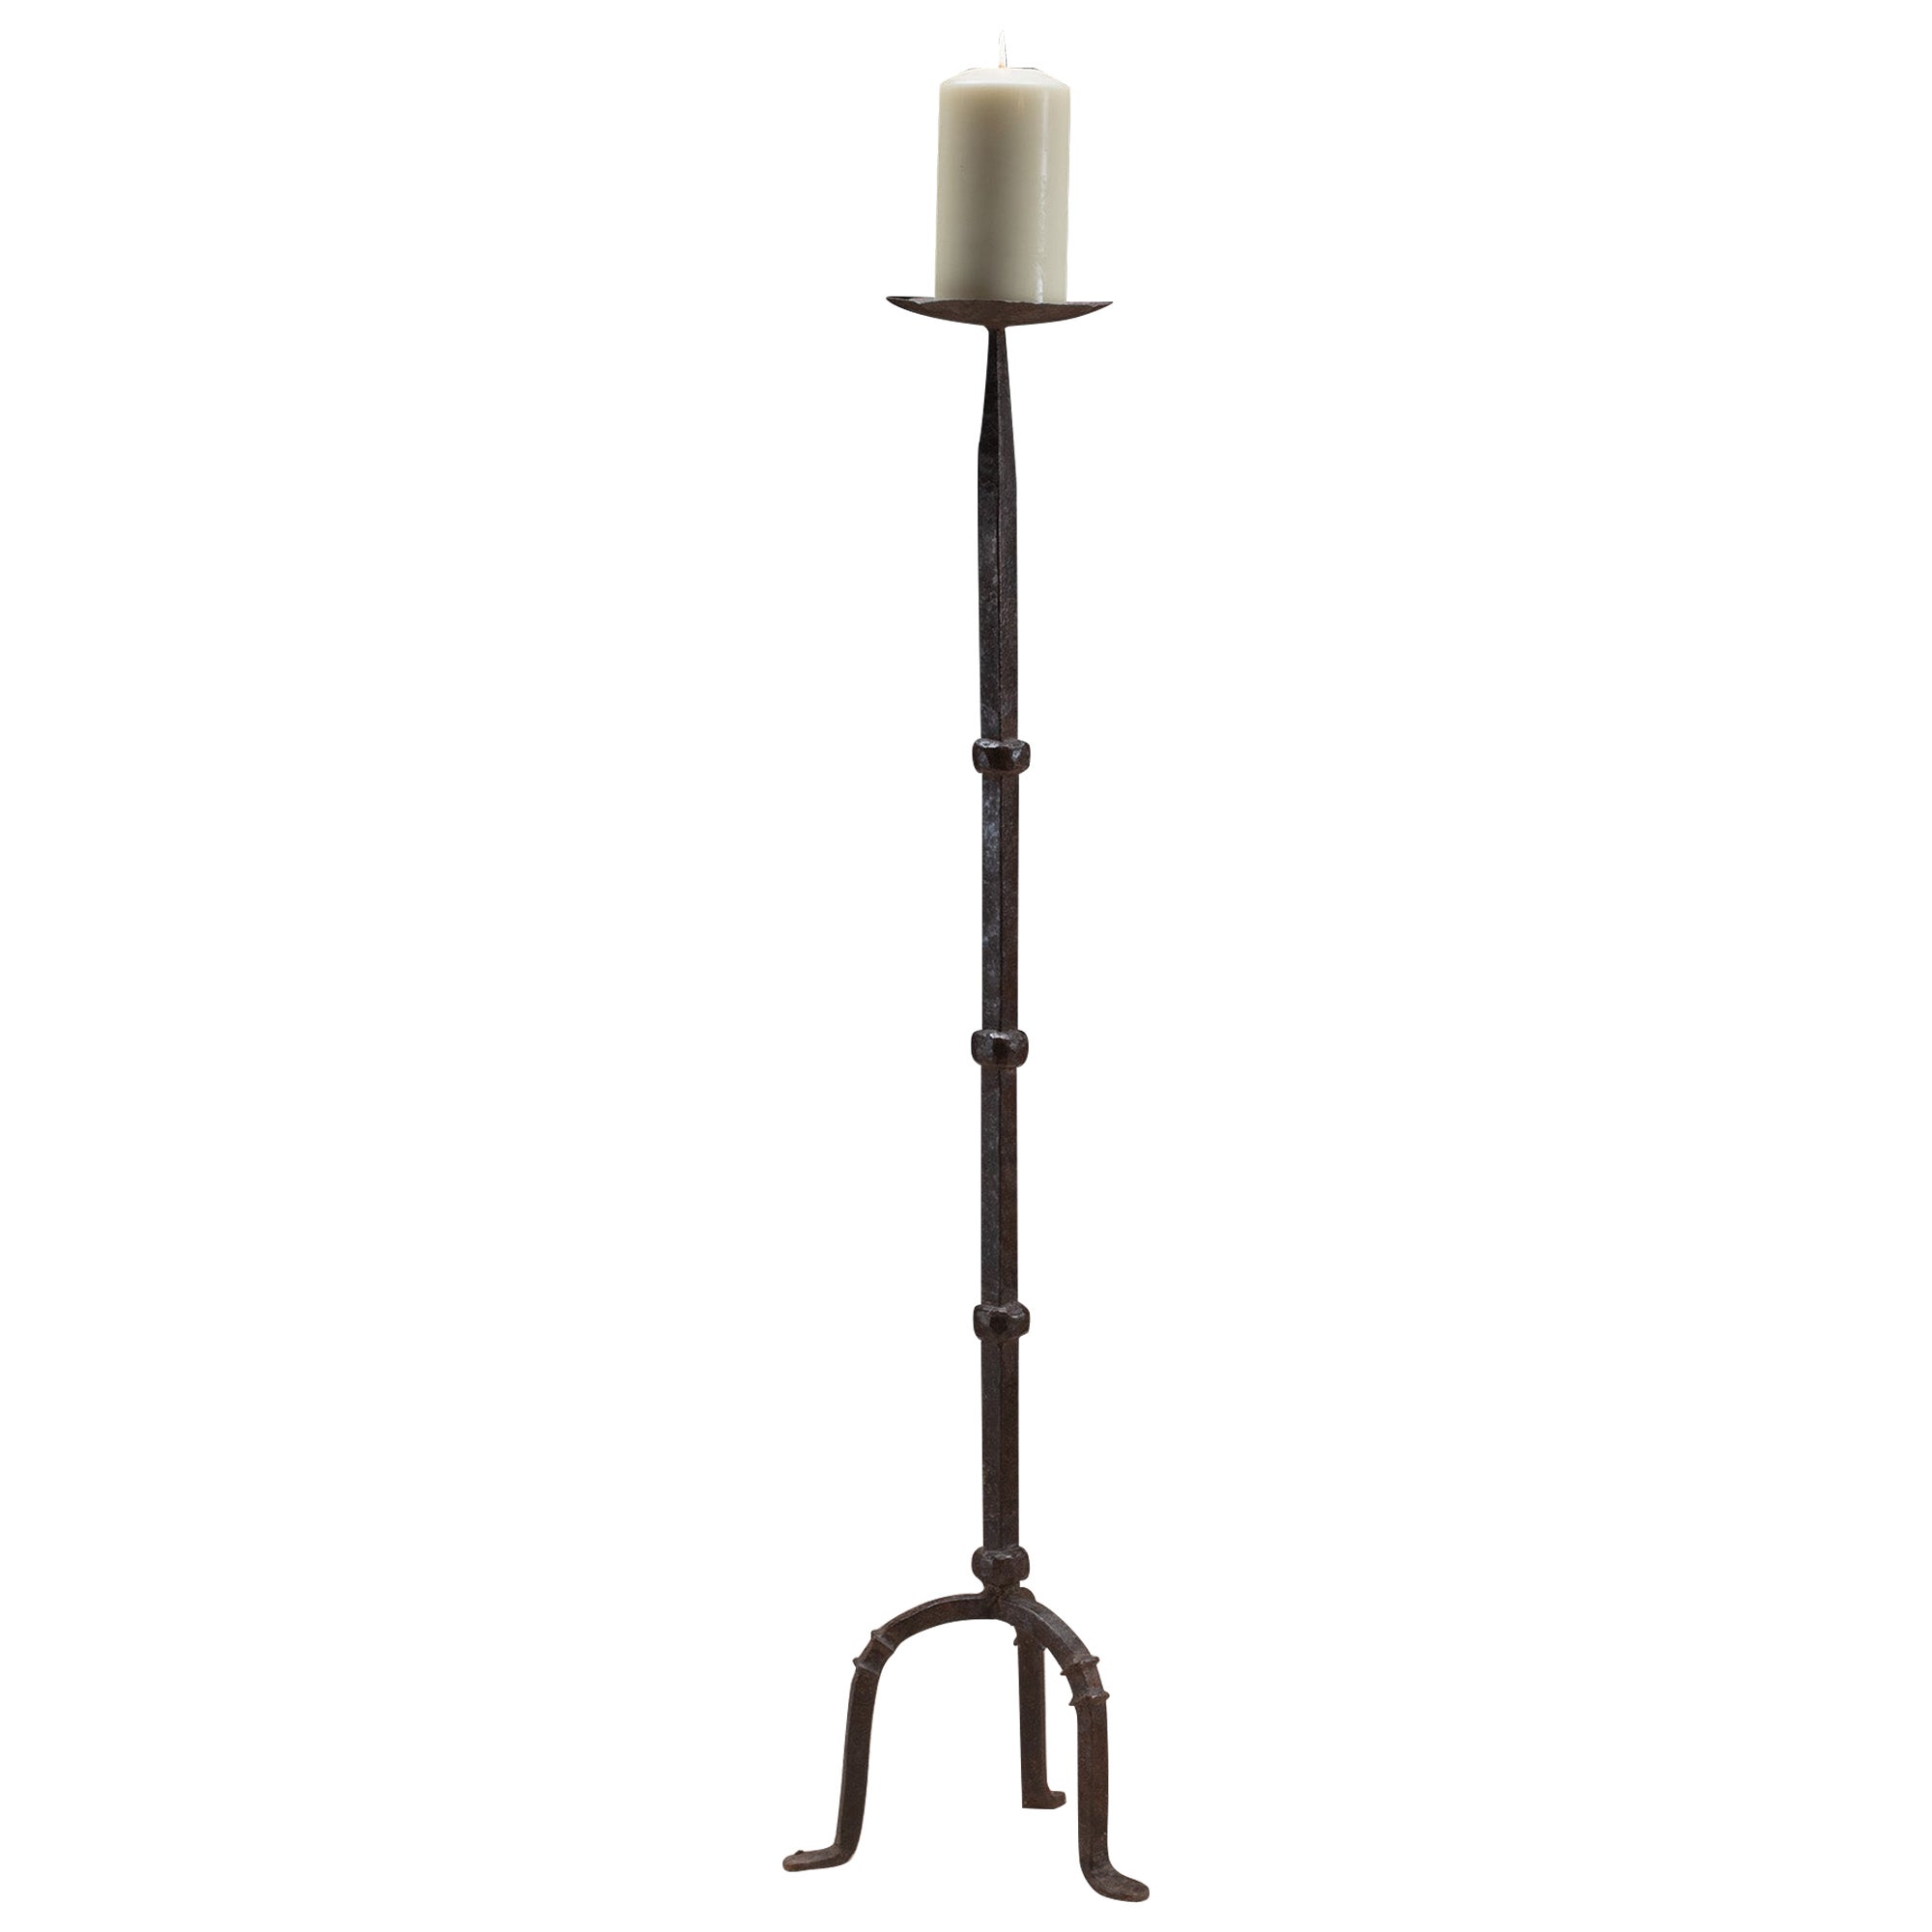 Torchere Iron Candle Gothic Tripod High 122cm., 4ft